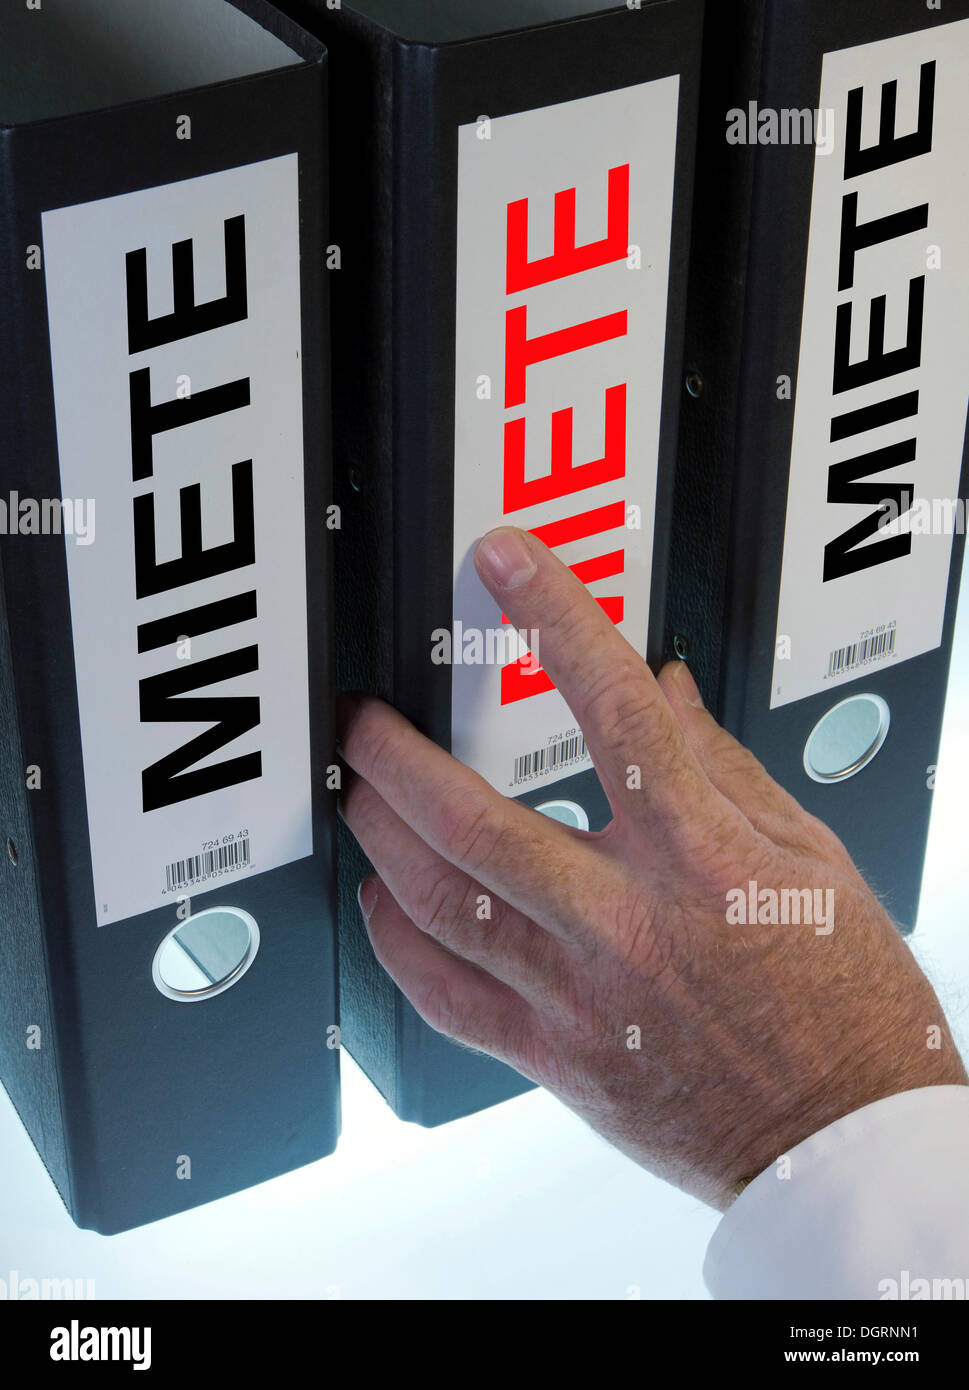 Hand reaching for a file folder labeled 'Miete', German for 'Rent' Stock Photo